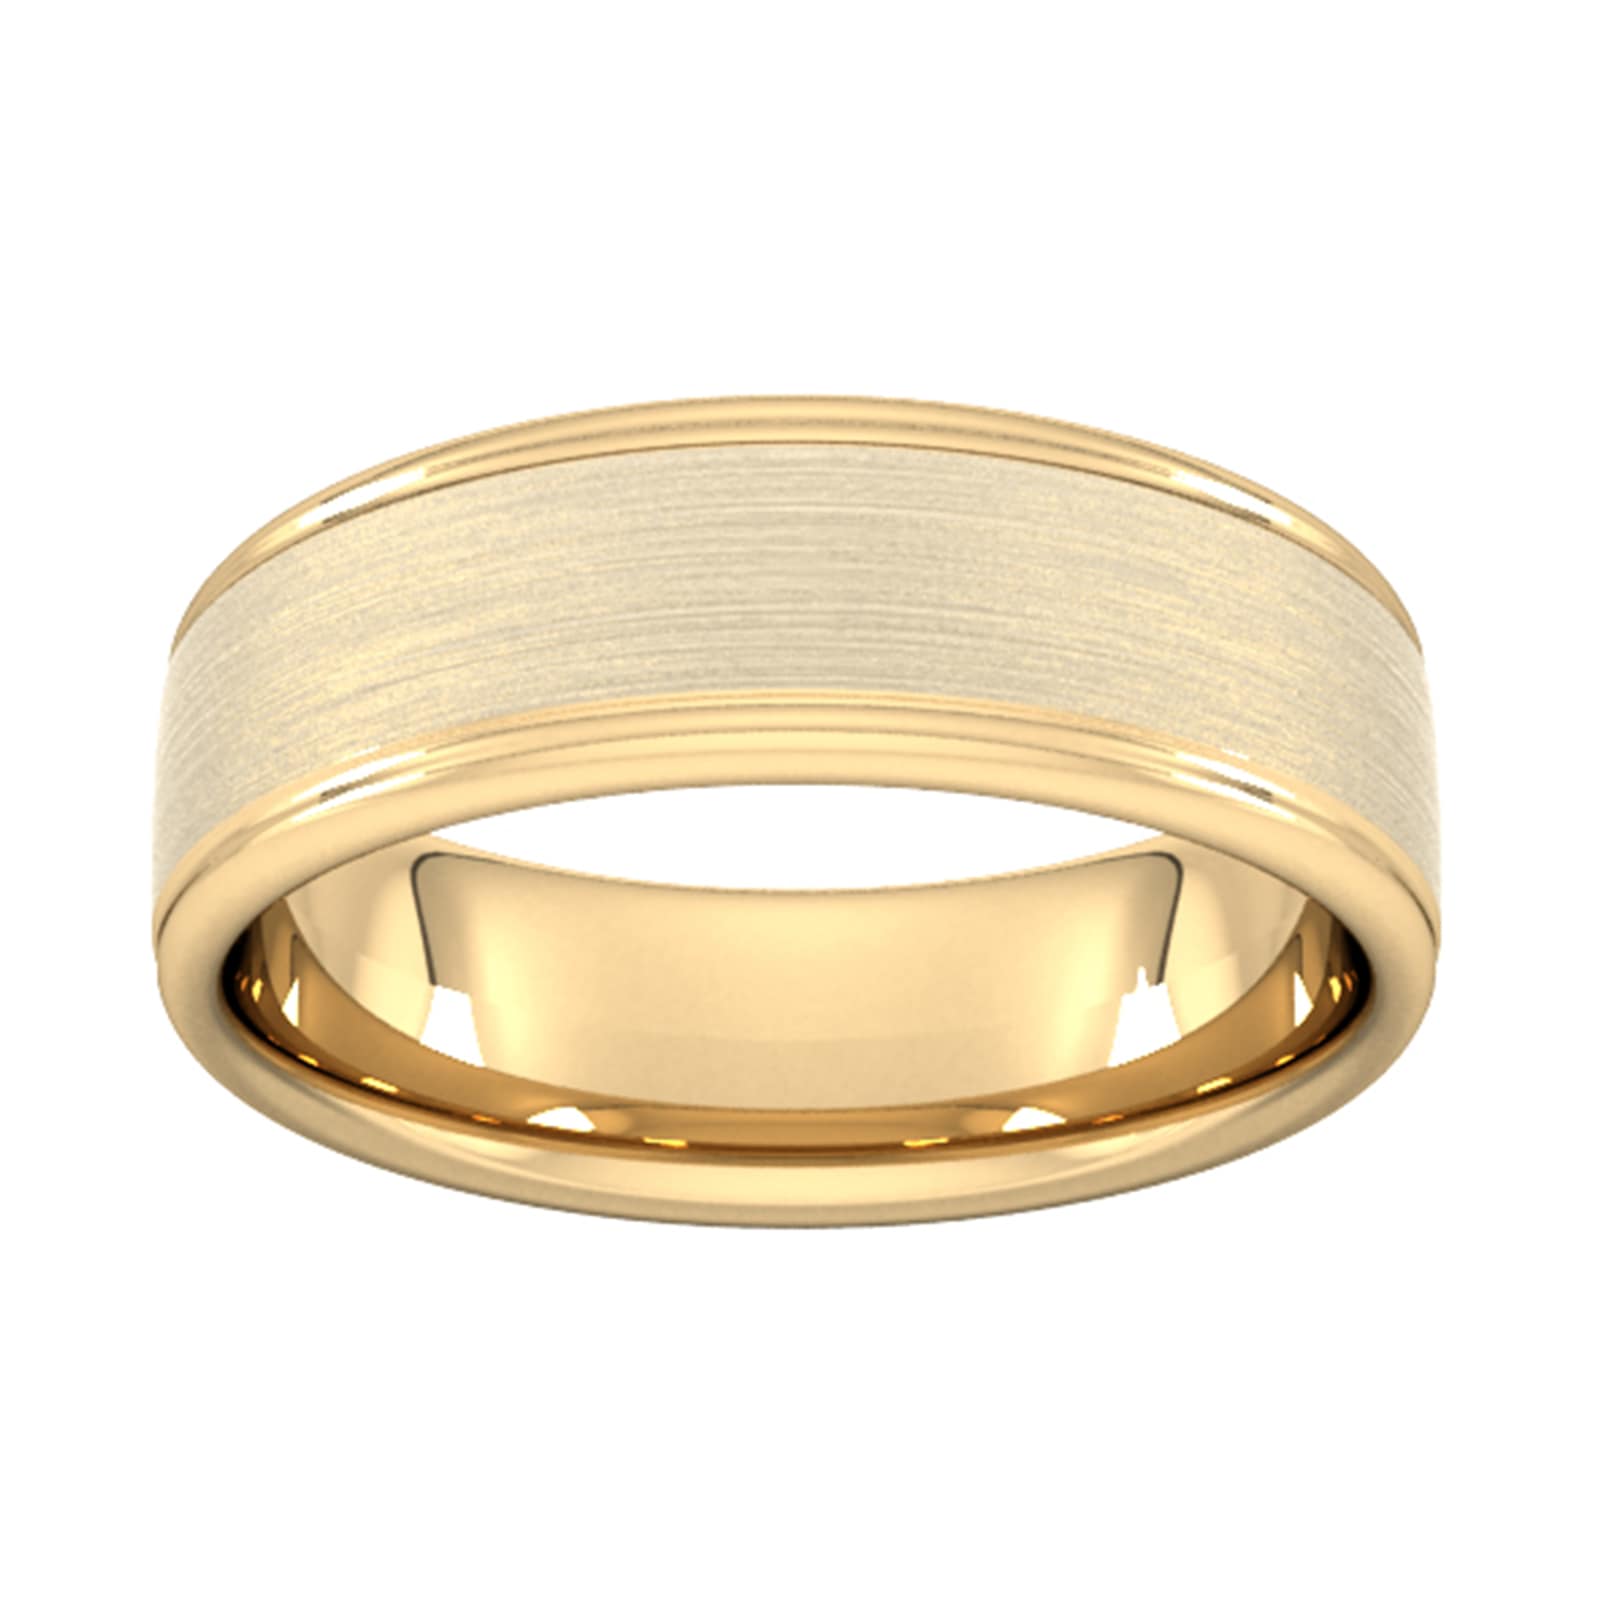 7mm Slight Court Heavy Matt Centre With Grooves Wedding Ring In 9 Carat Yellow Gold - Ring Size S